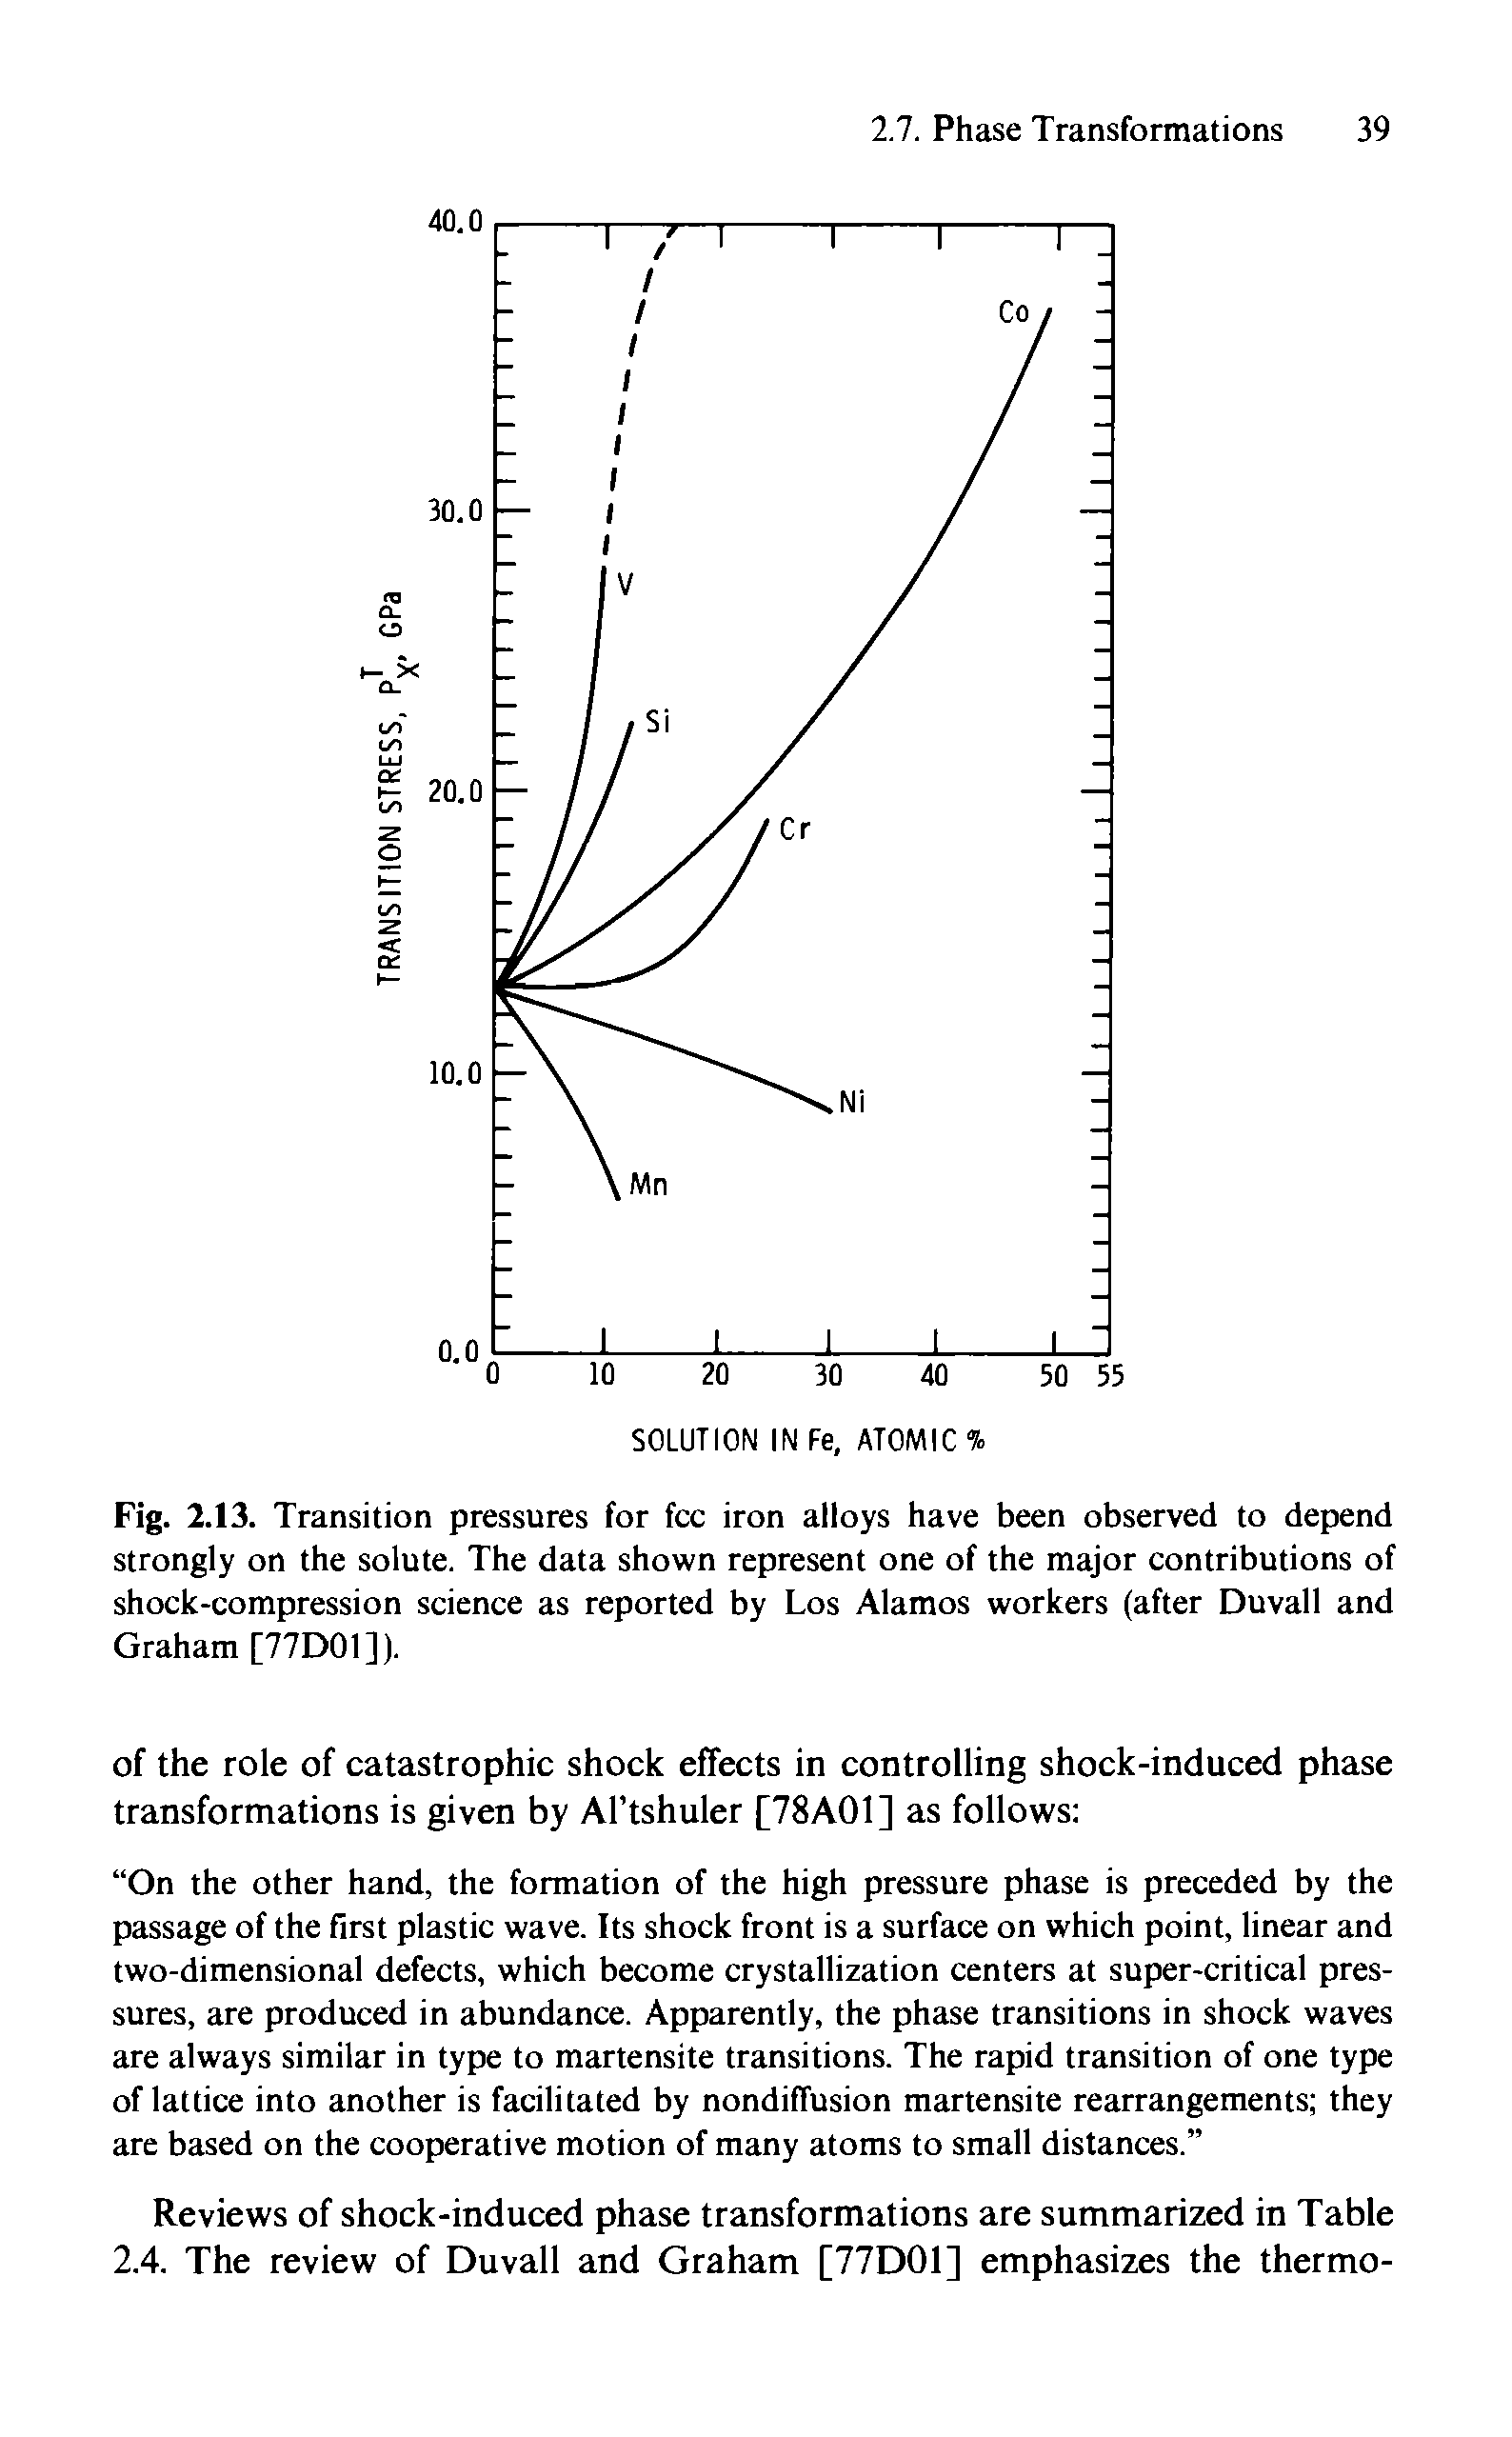 Fig. 2.13. Transition pressures for fee iron alloys have been observed to depend strongly on the solute. The data shown represent one of the major eontributions of shoek-eompression seienee as reported by Los Alamos workers (after Duvall and Graham [77D01]).